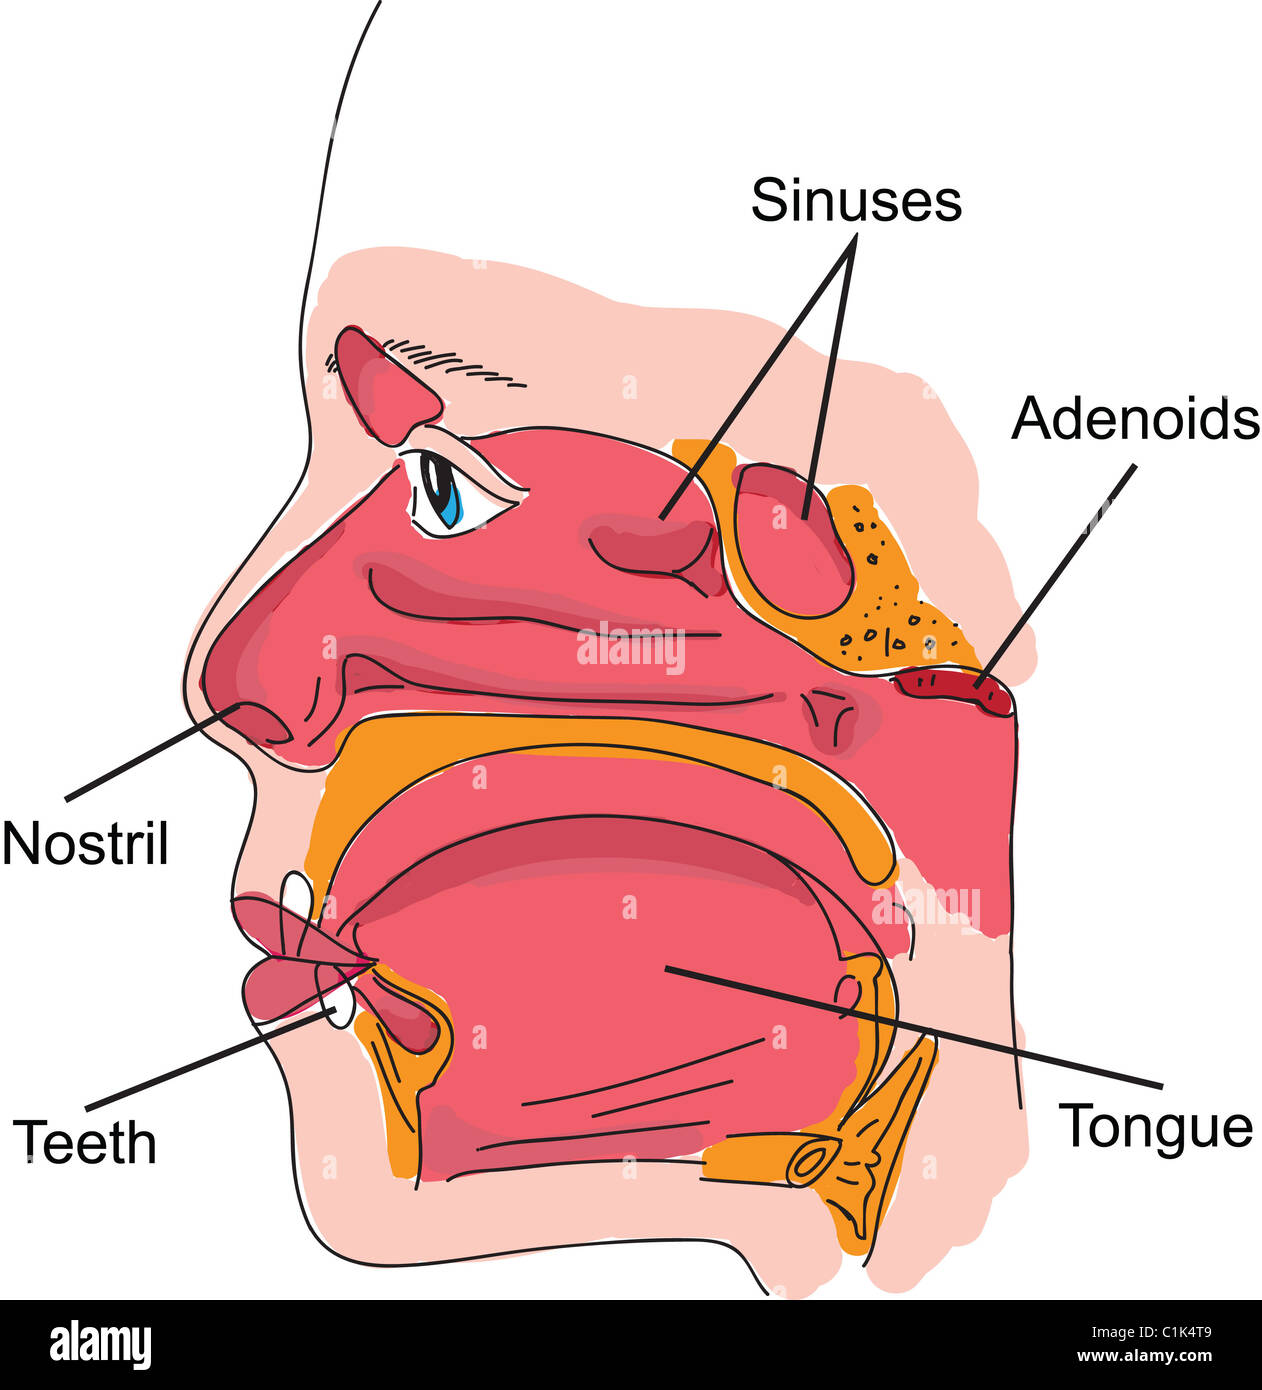 Structure of human nose and mouth anatomy illustration Stock Photo